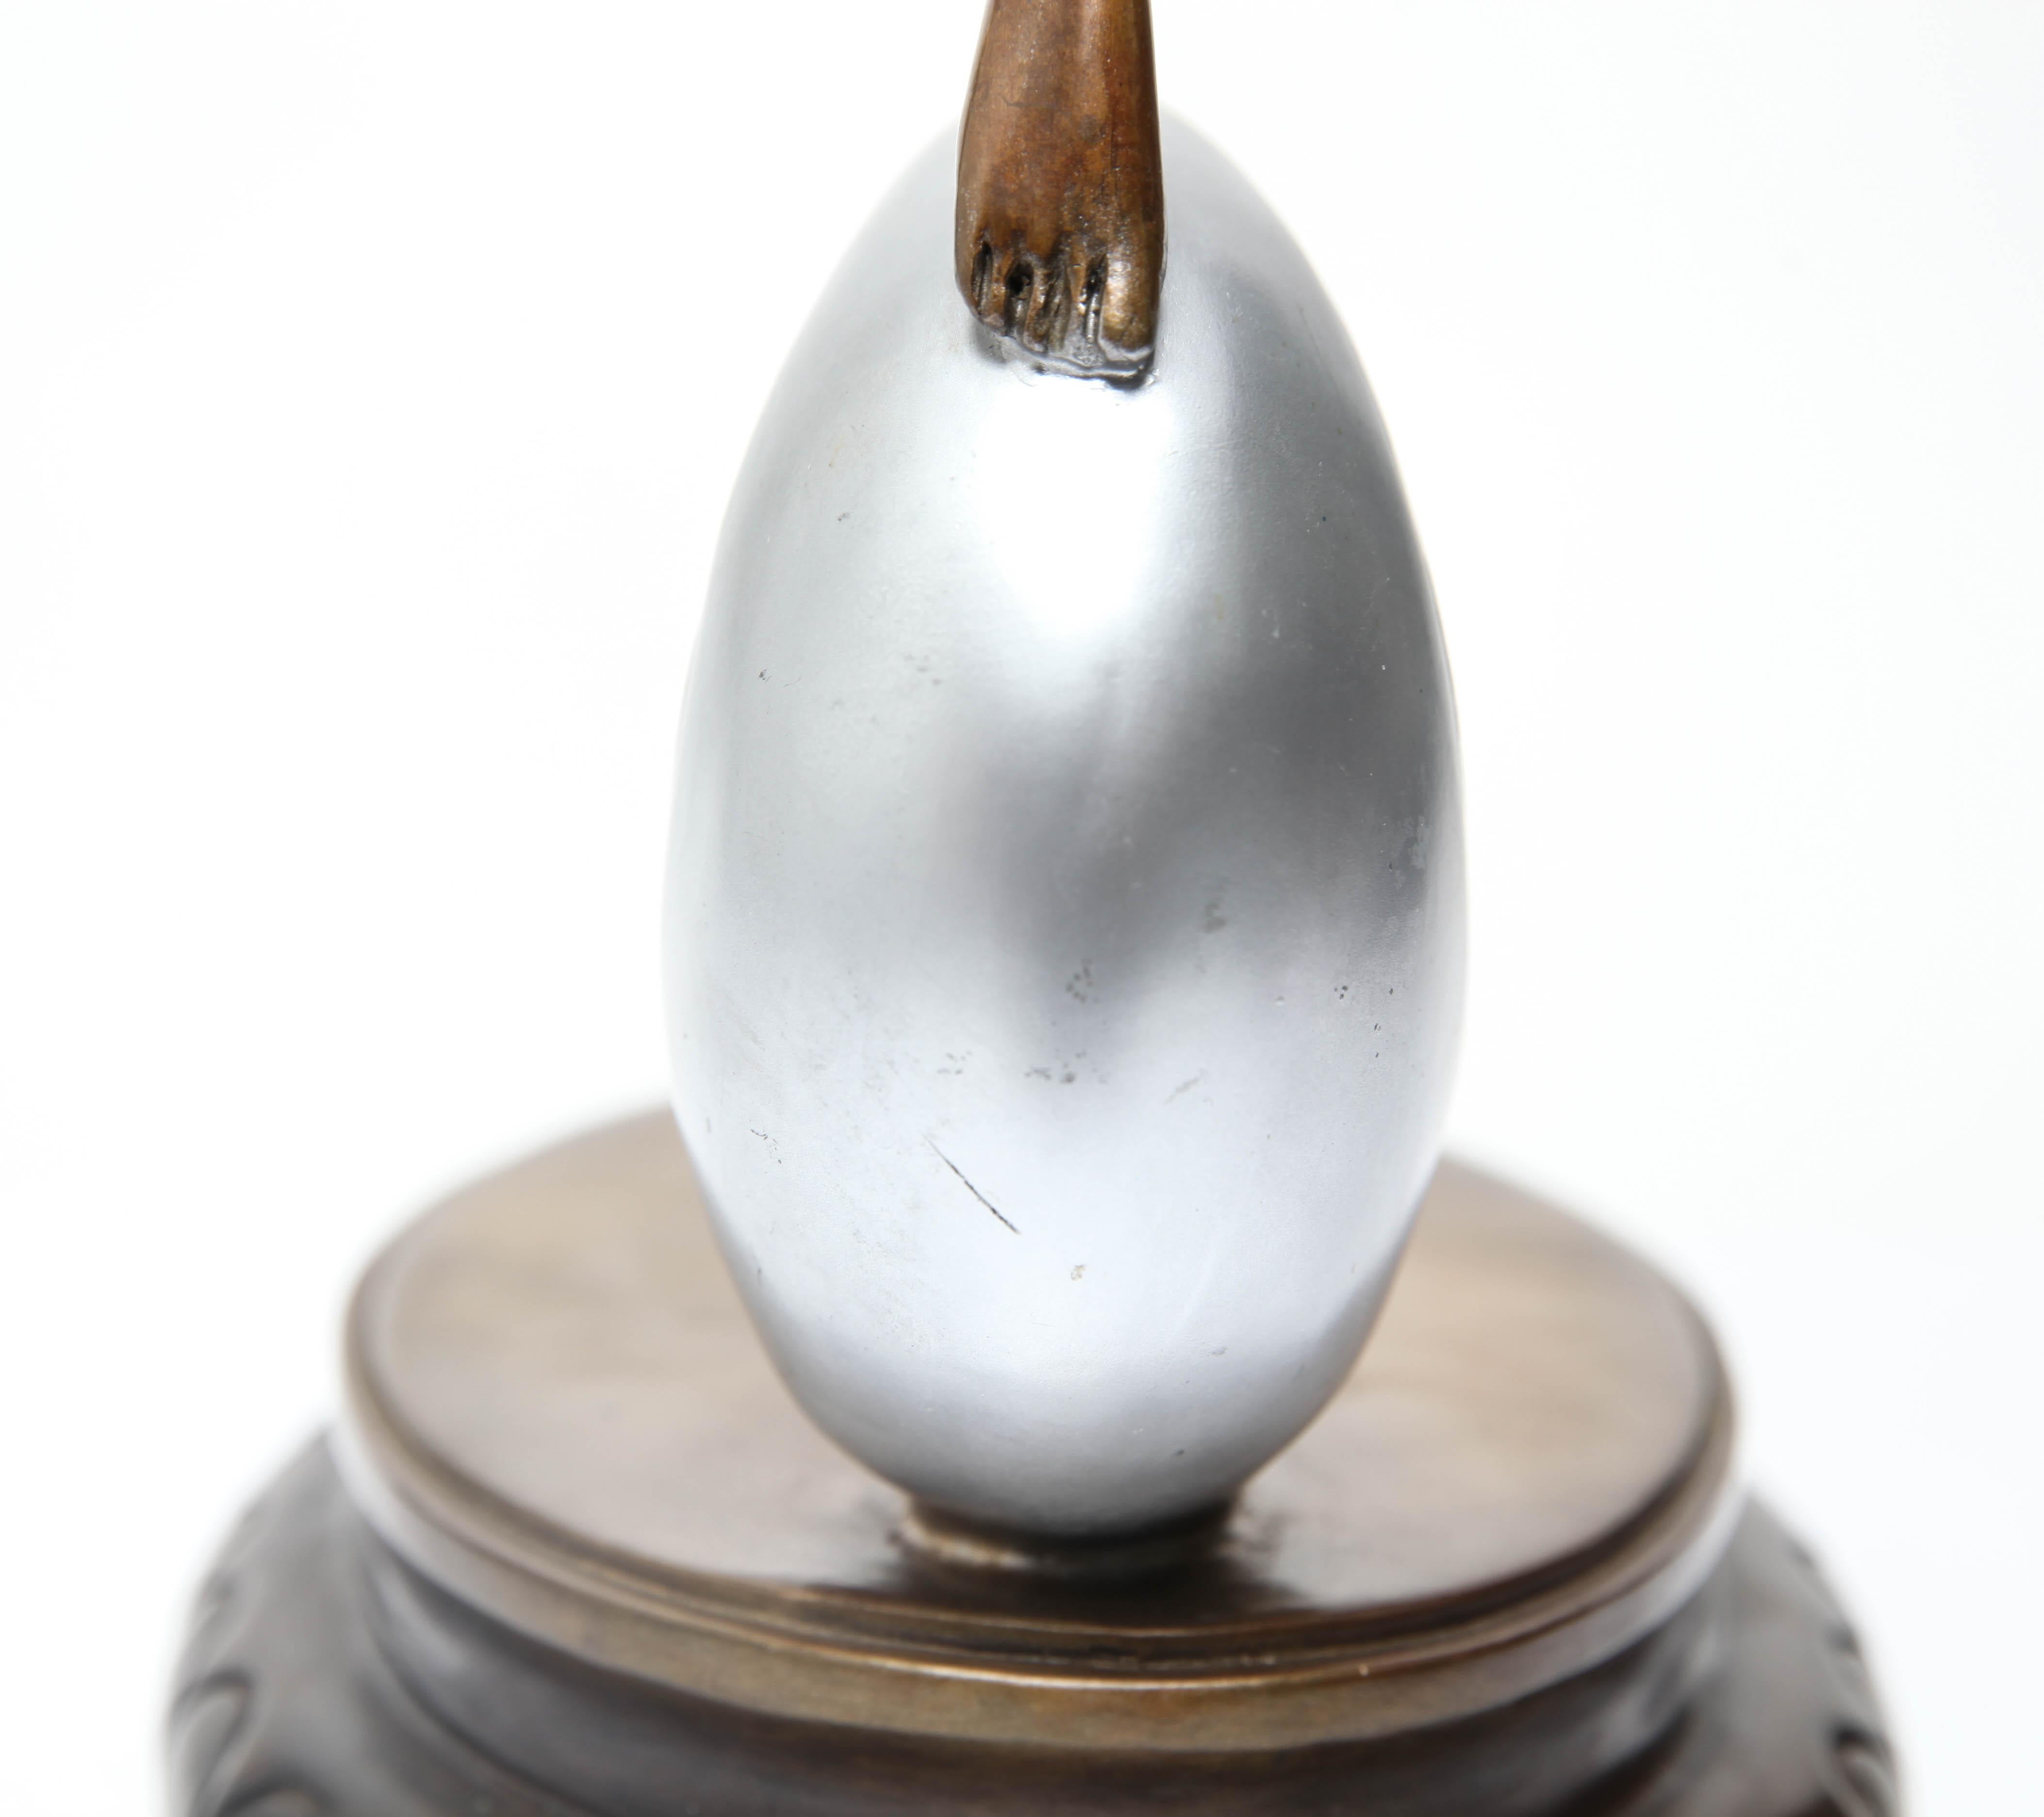 Angelo Basso 'La Luna' Art Deco revival painted bronze sculpture of a female nude emerging from a crescent moon. The piece is signed on the base 